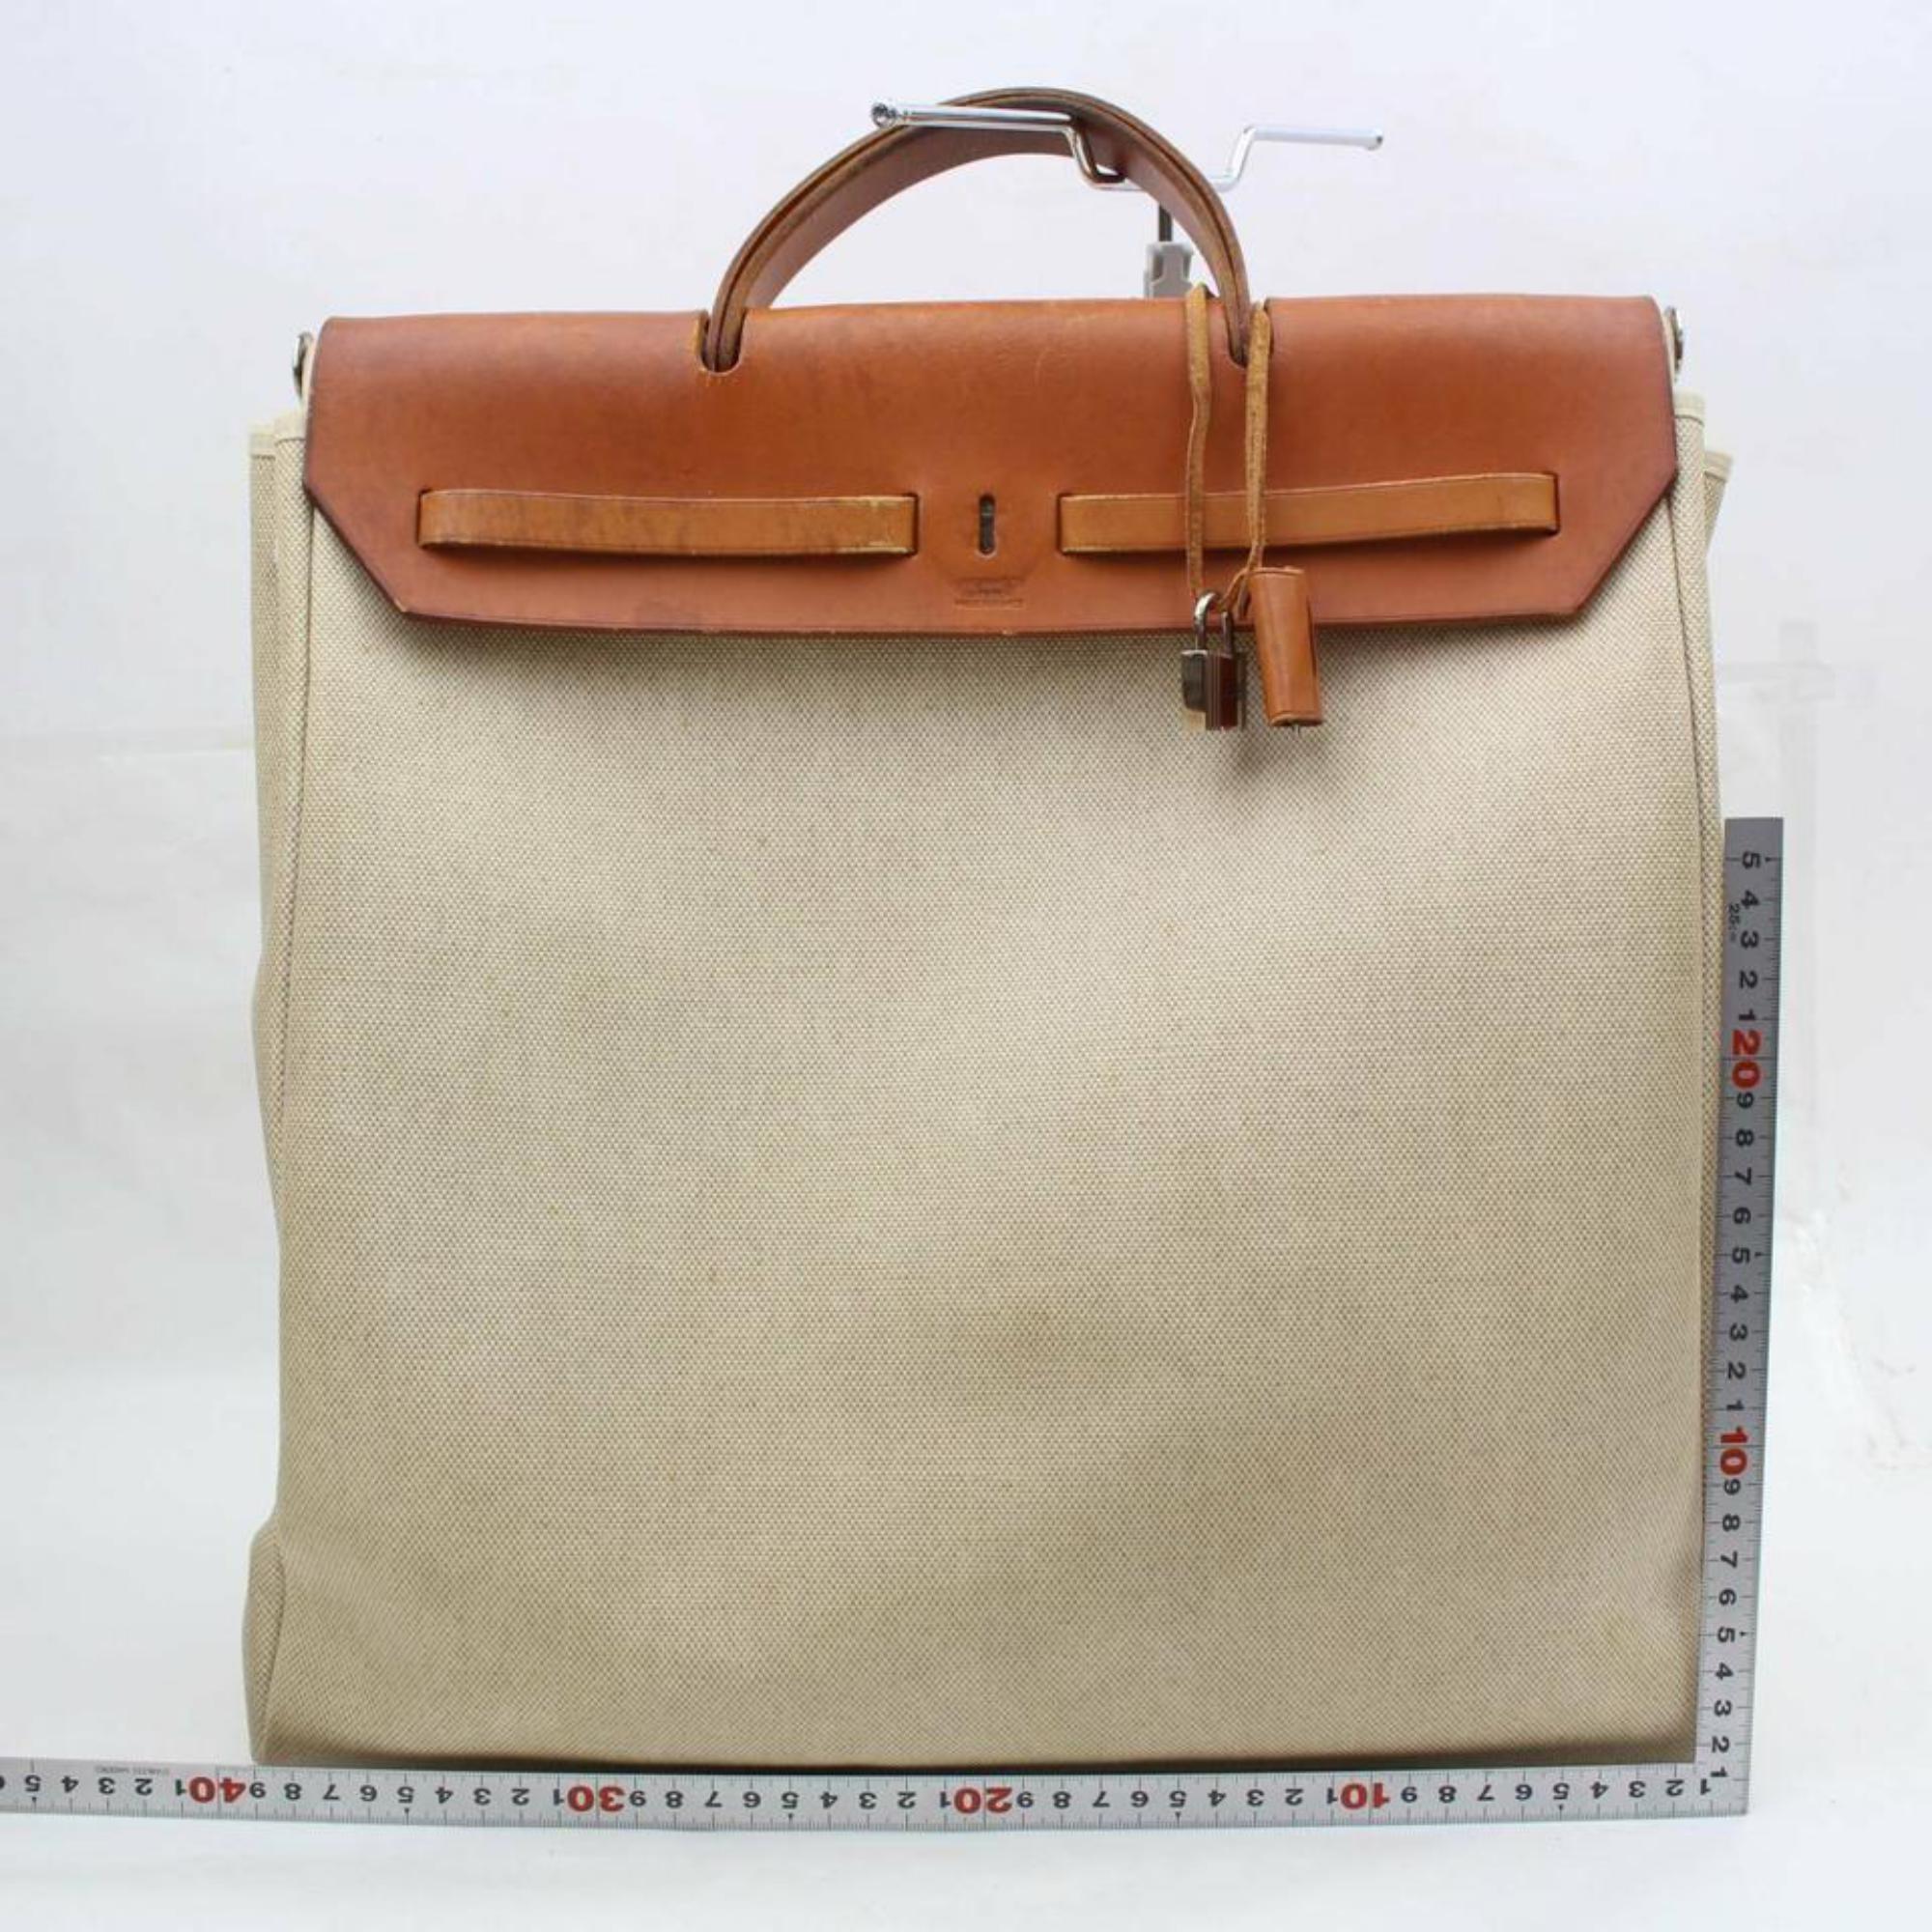 Hermès Herbag Toile Ado Sac A Dos 2-in-1 870345 Beige Coated Canvas Tote In Good Condition For Sale In Forest Hills, NY